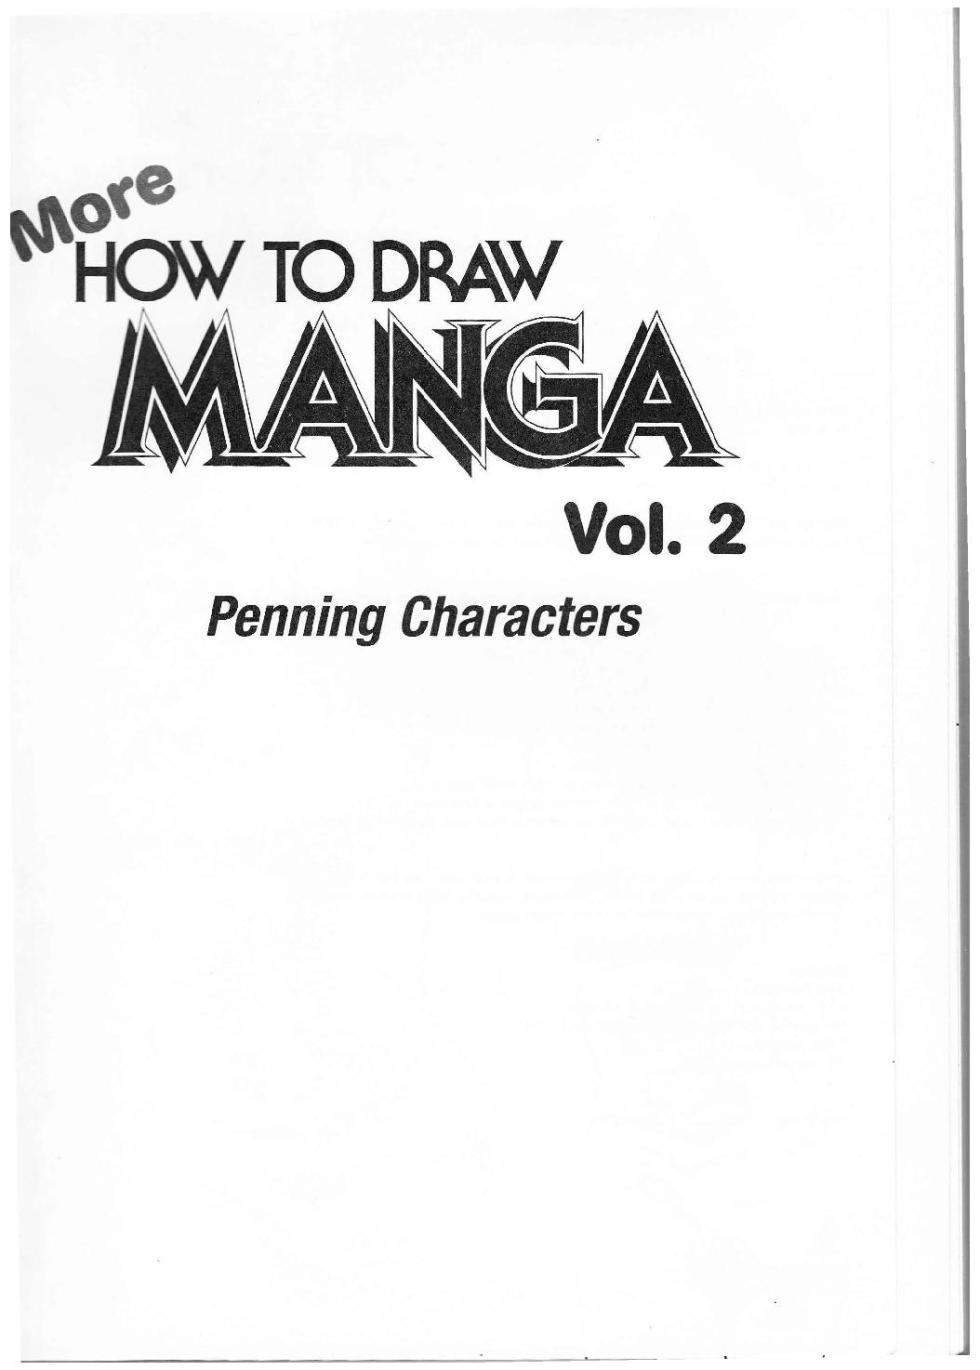 More How to Draw Manga Vol. 2 - Penning Characters - Page 3